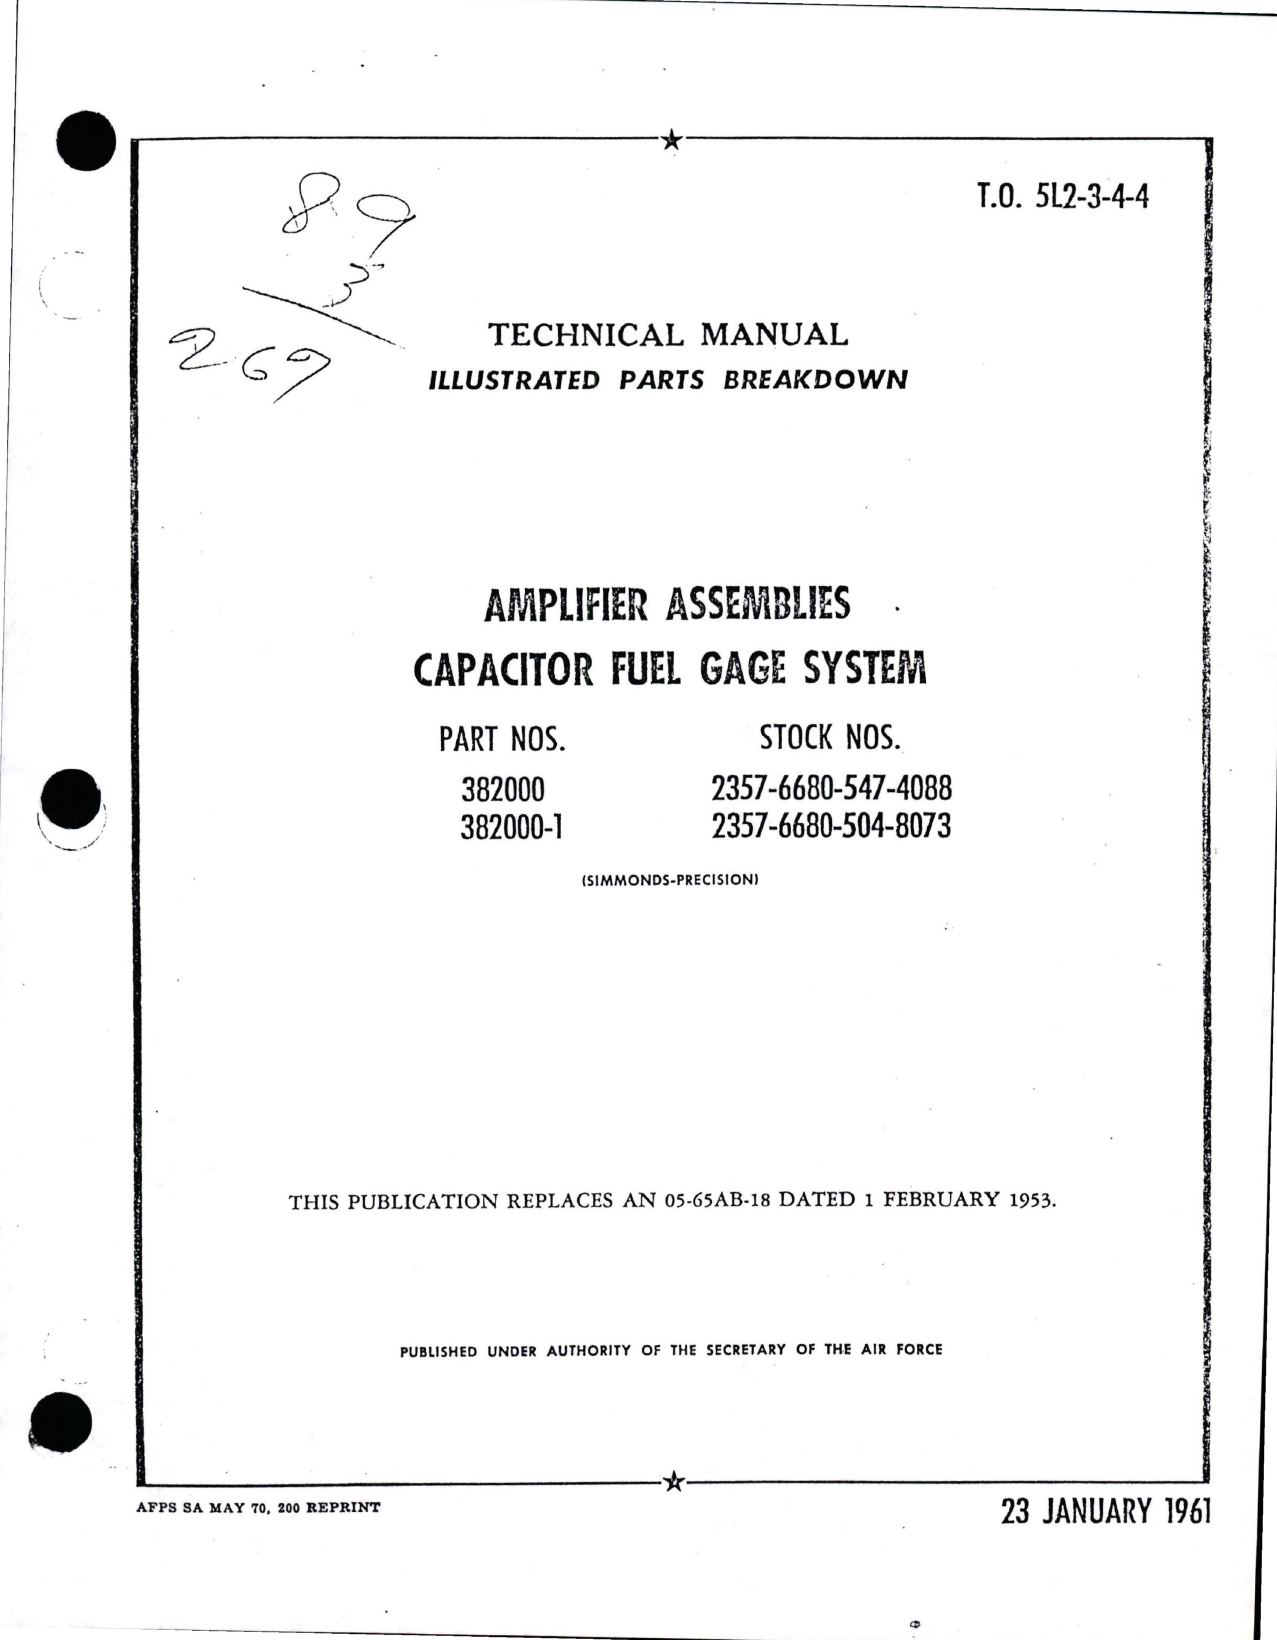 Sample page 1 from AirCorps Library document: Illustrated Parts Breakdown for Capacitor Fuel Gage System Amplifier Assemblies - Parts 382000 and 382000-1